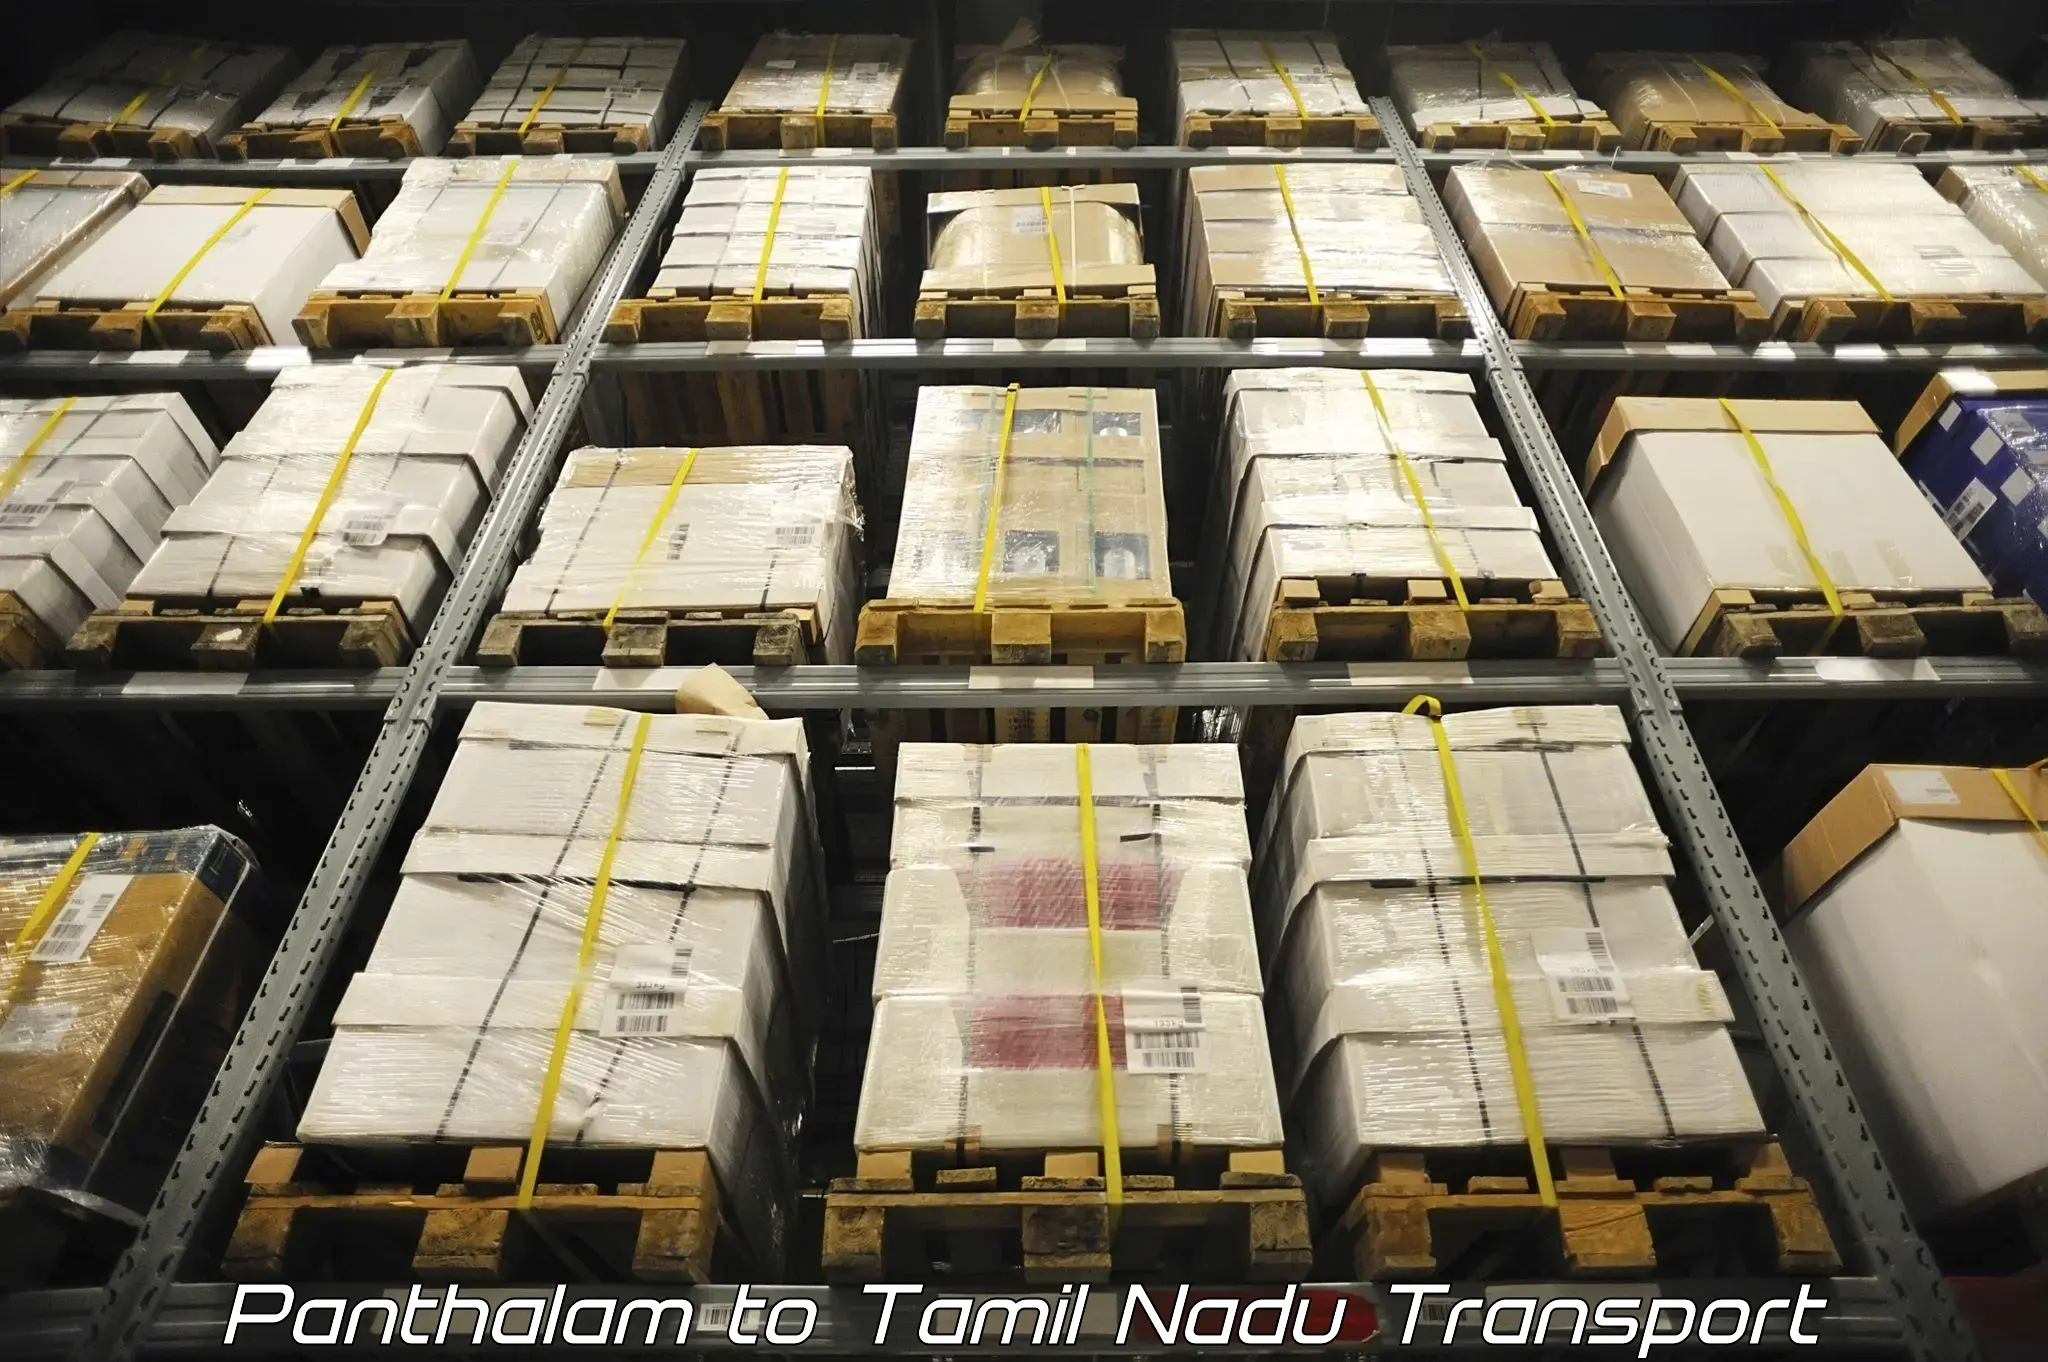 Container transport service Panthalam to Tamil Nadu